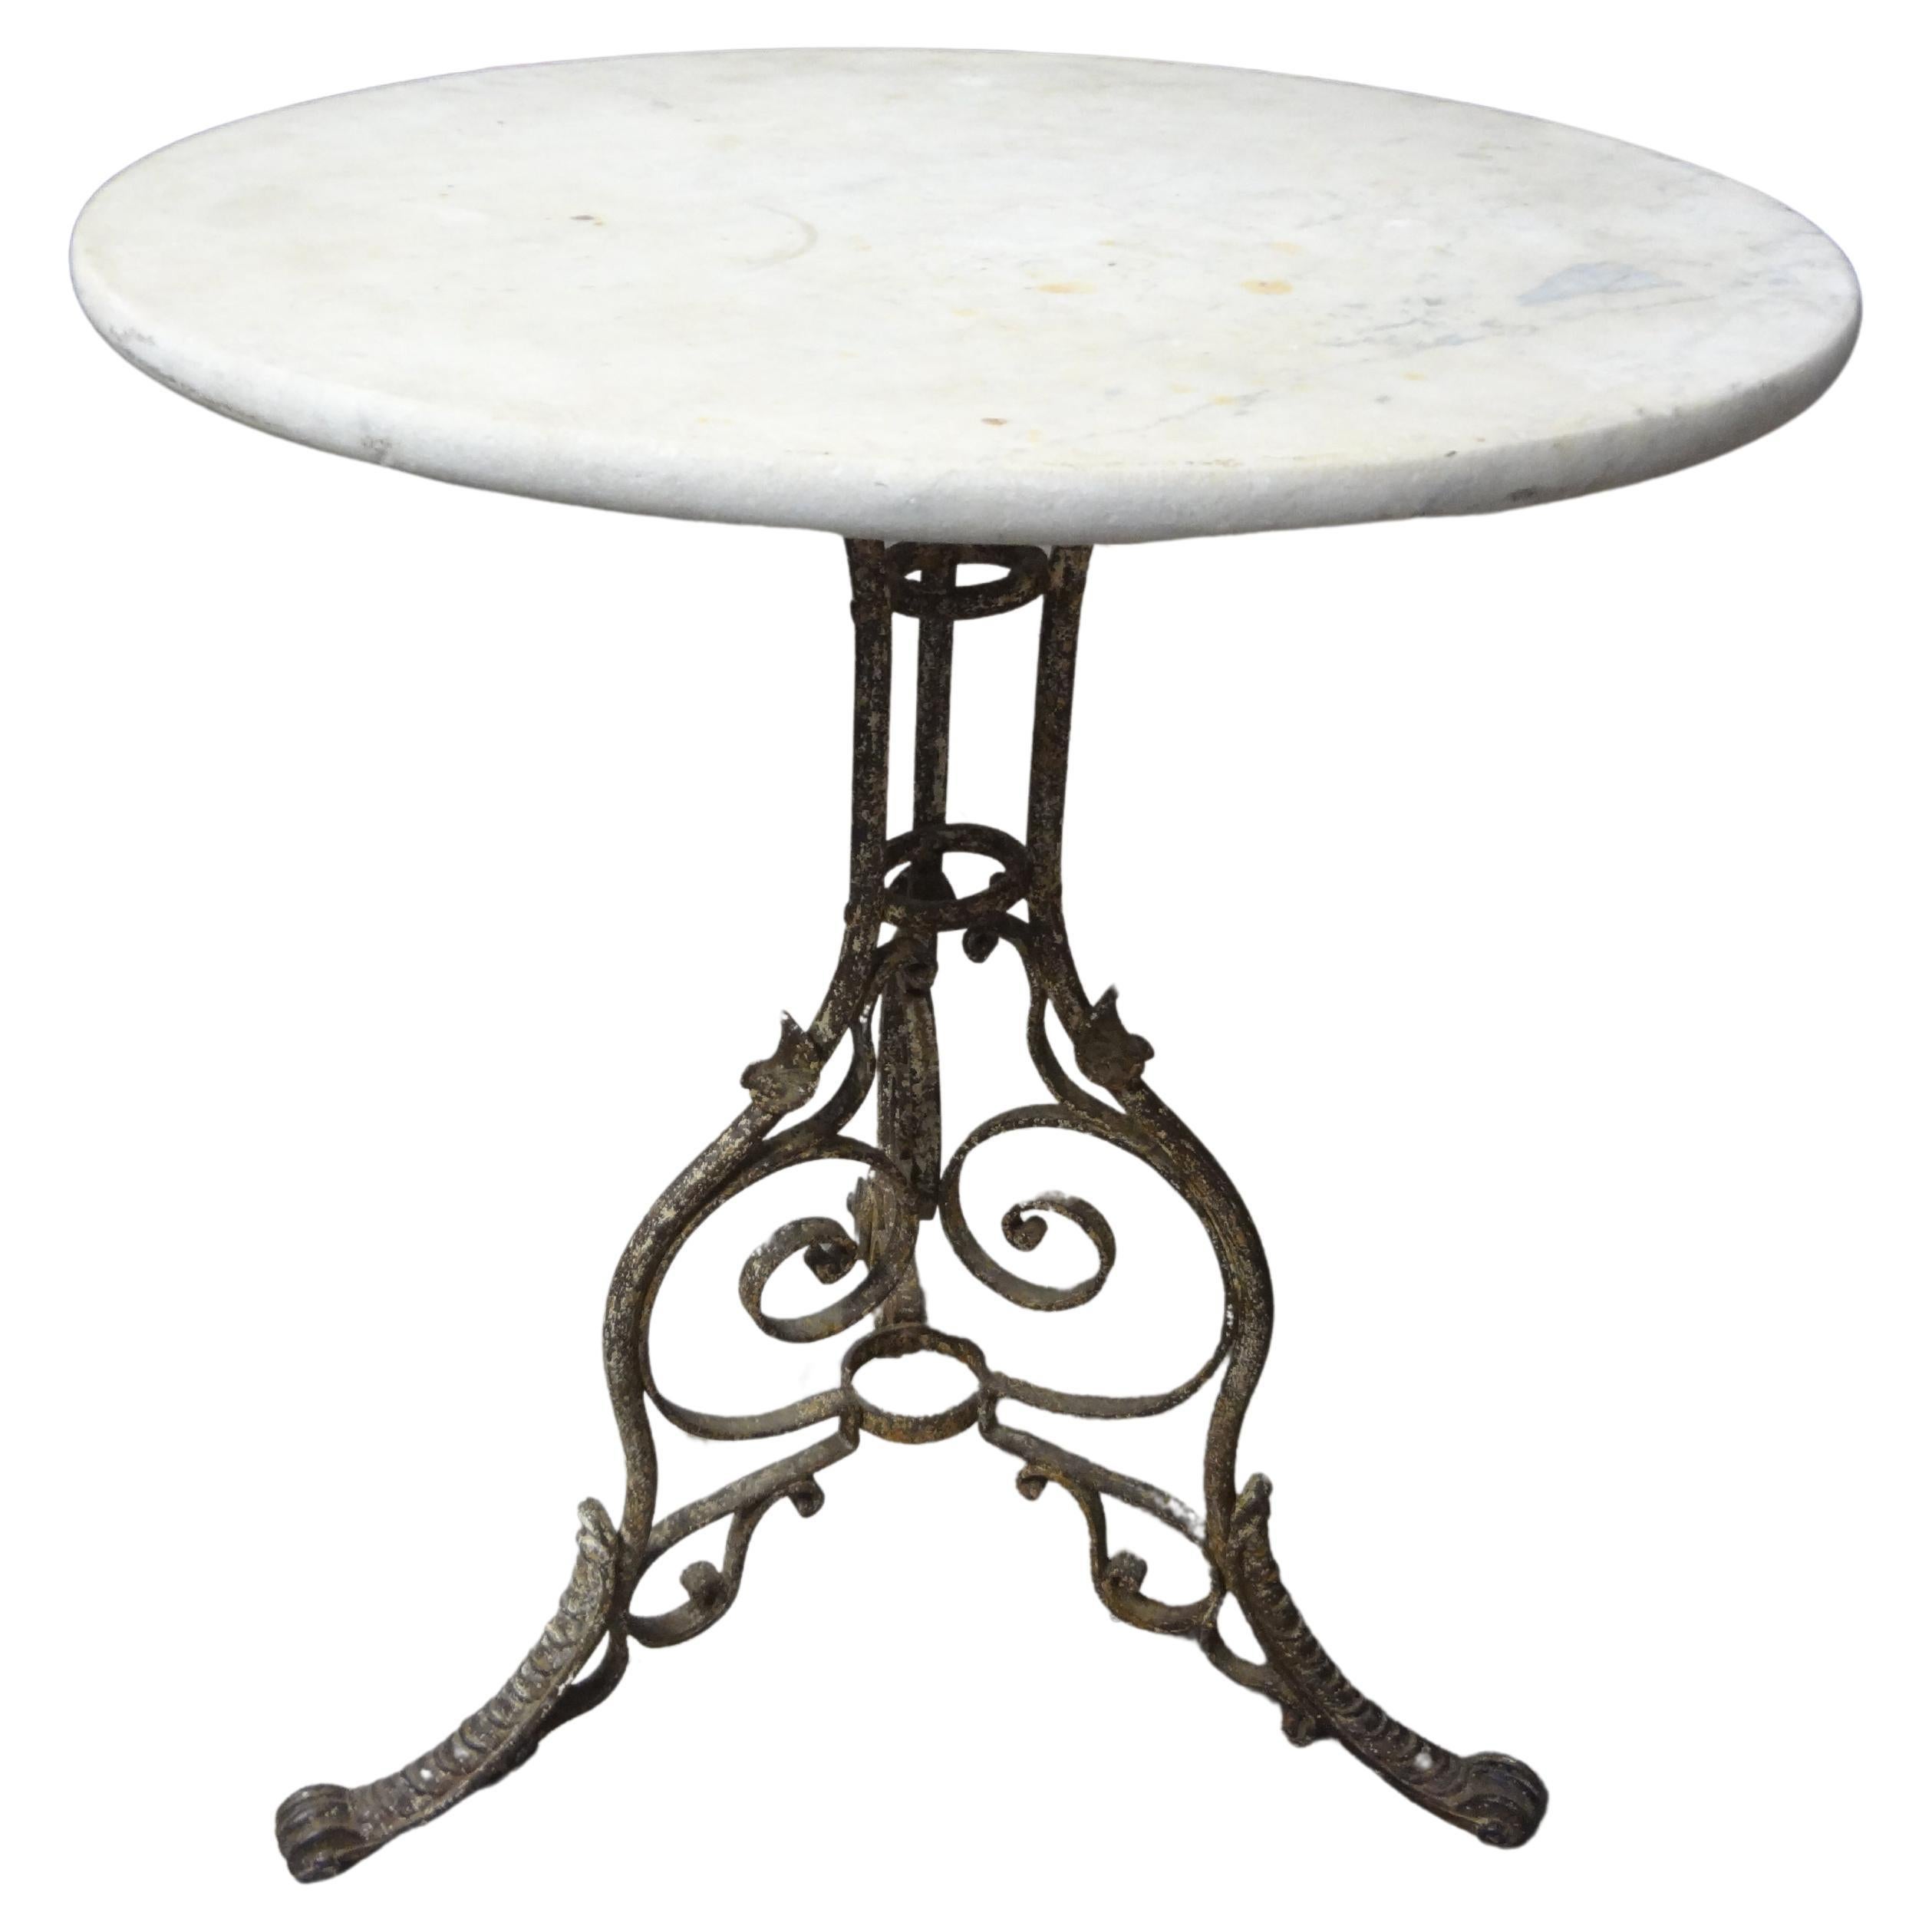 19th Century French Iron And Marble Garden Table For Sale